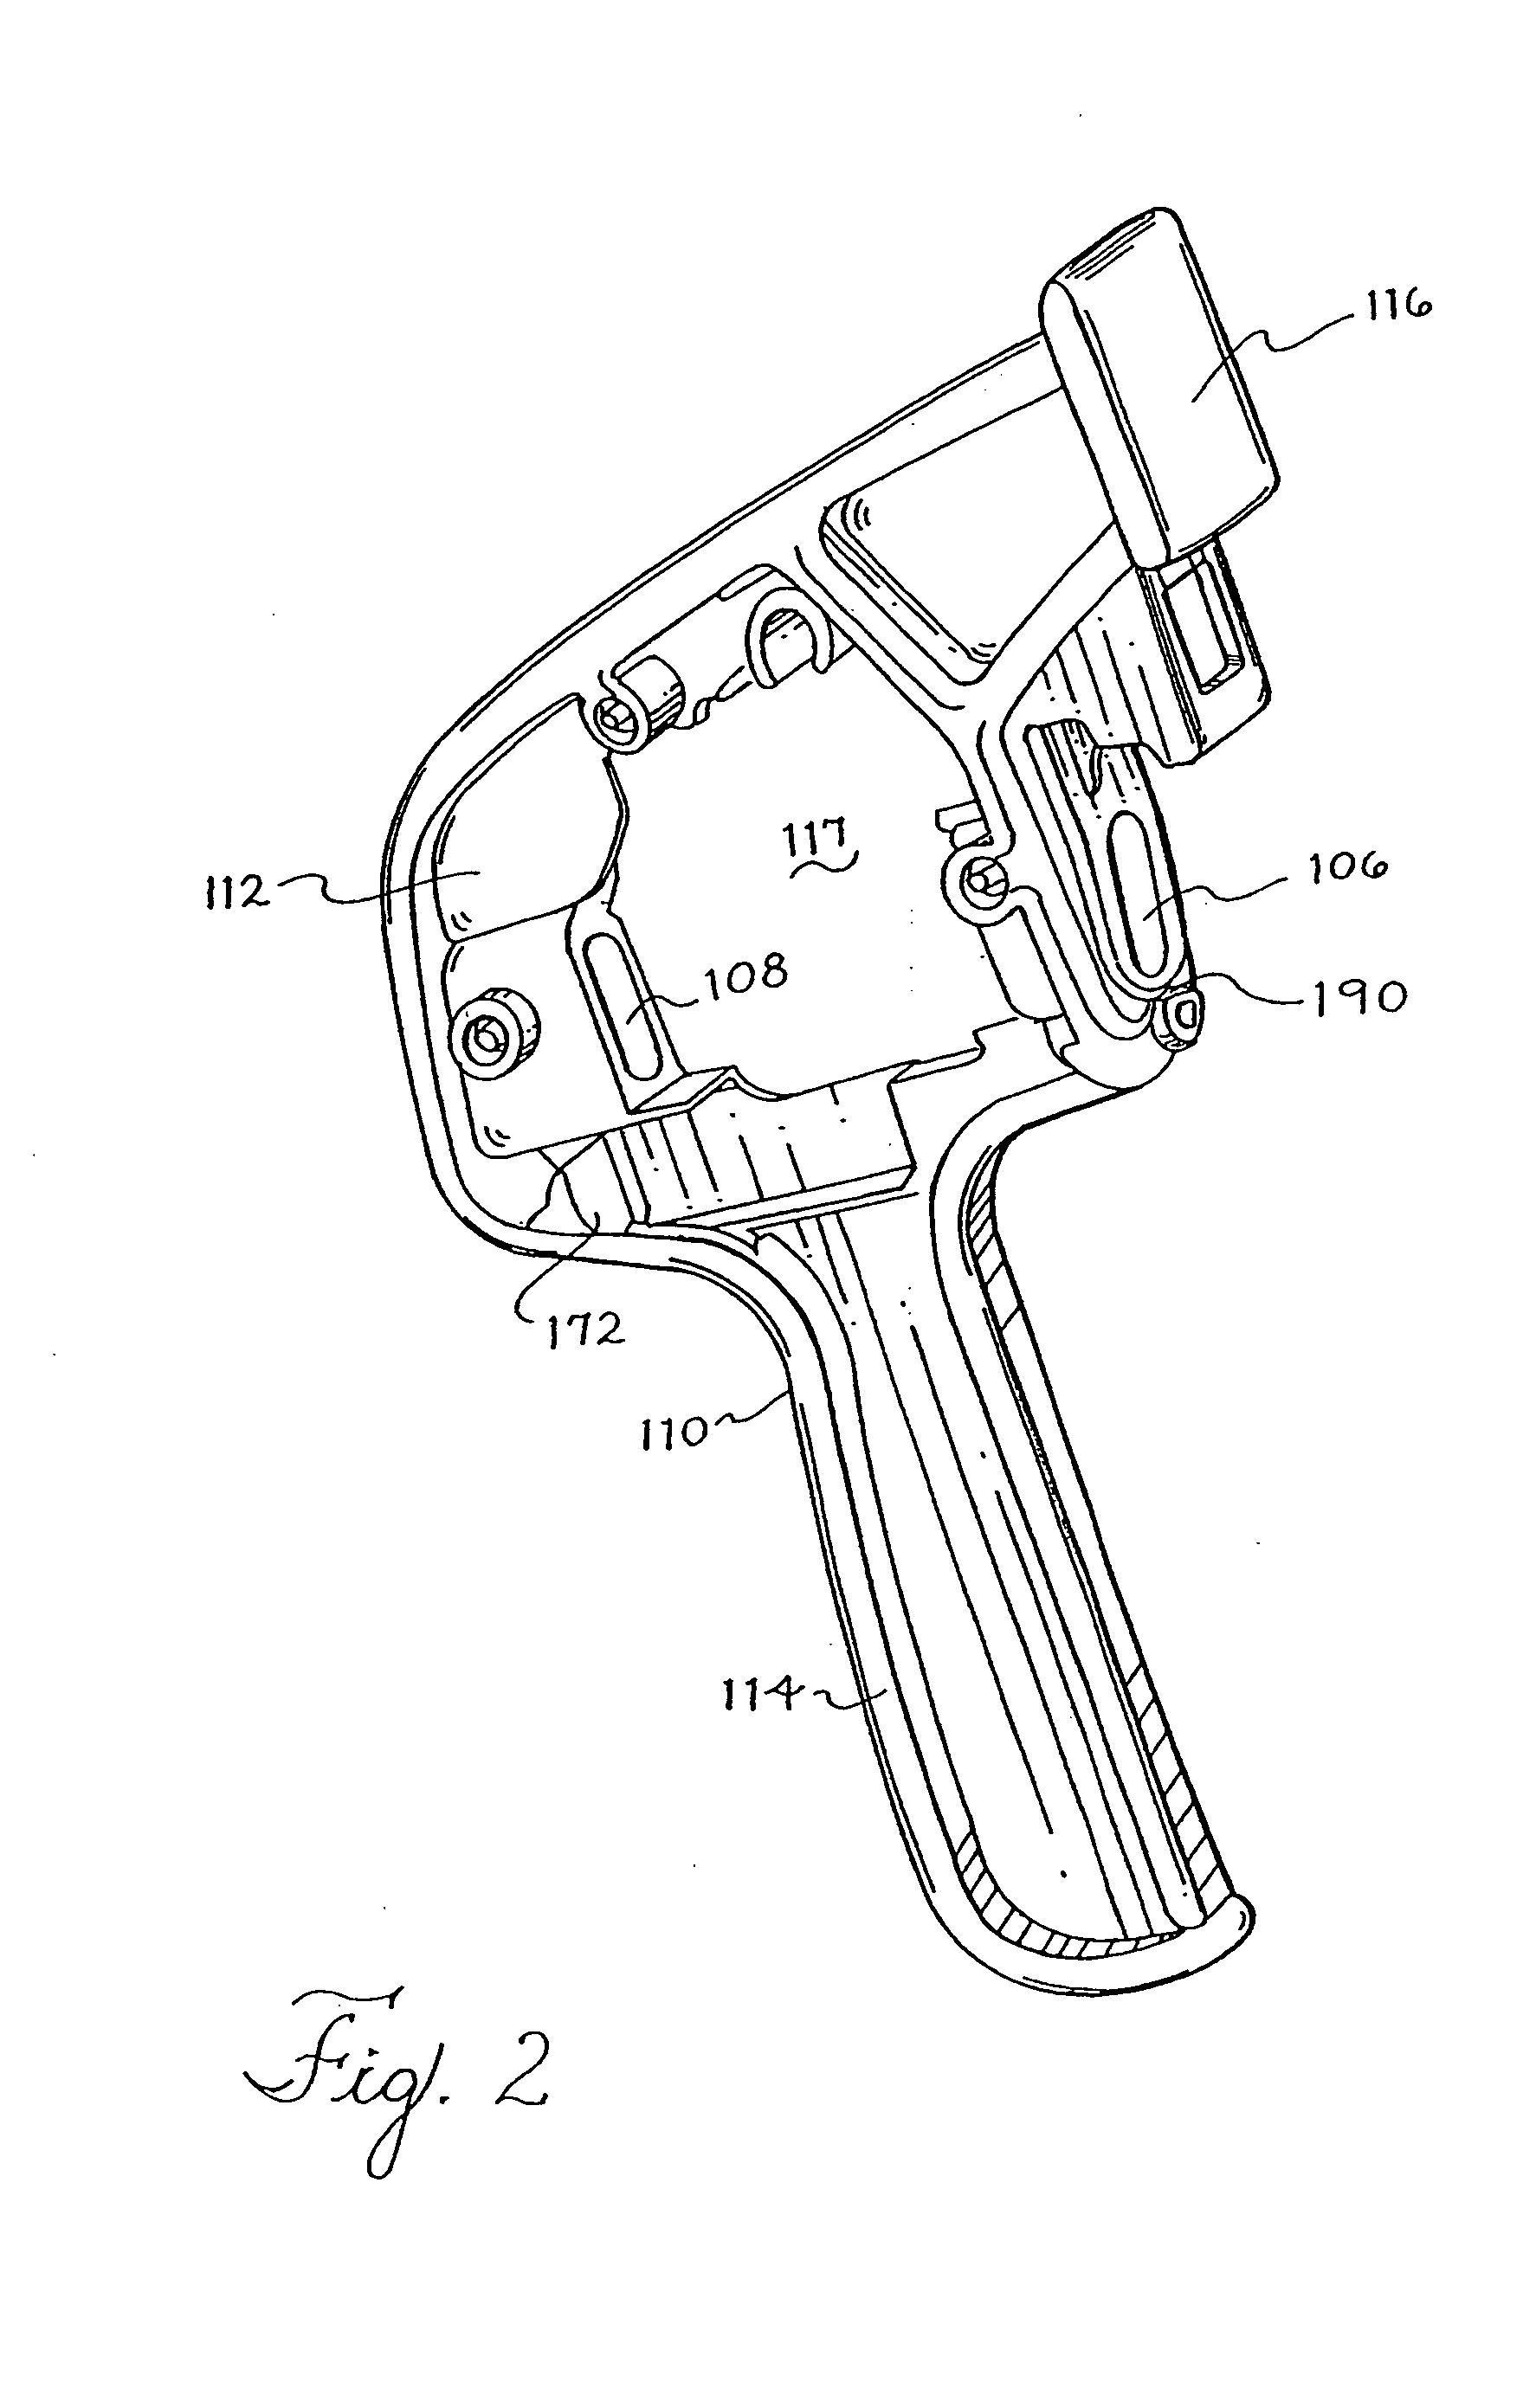 Increased and variable force and multi-speed clamps